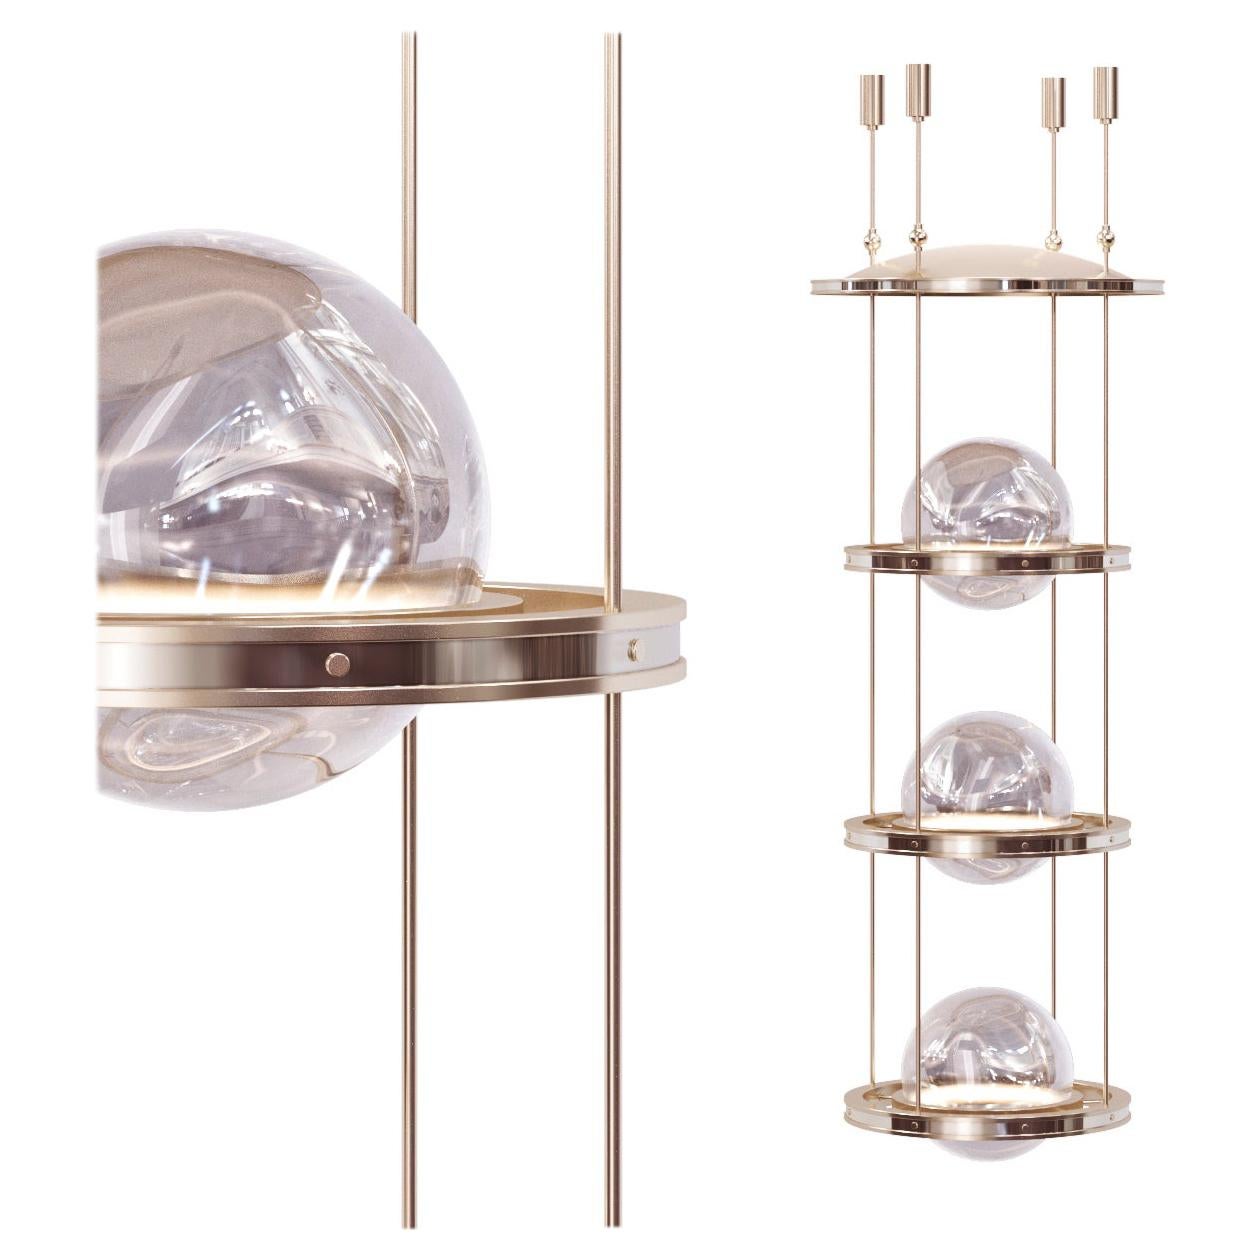 Meissa is a contemporary light chandelier with the presence to be a centrepiece in any generous, high-ceilinged space, including atriums and stairwells. Light is refracted in the hidden depths of the solid glass spheres and casts a silky sheen in a